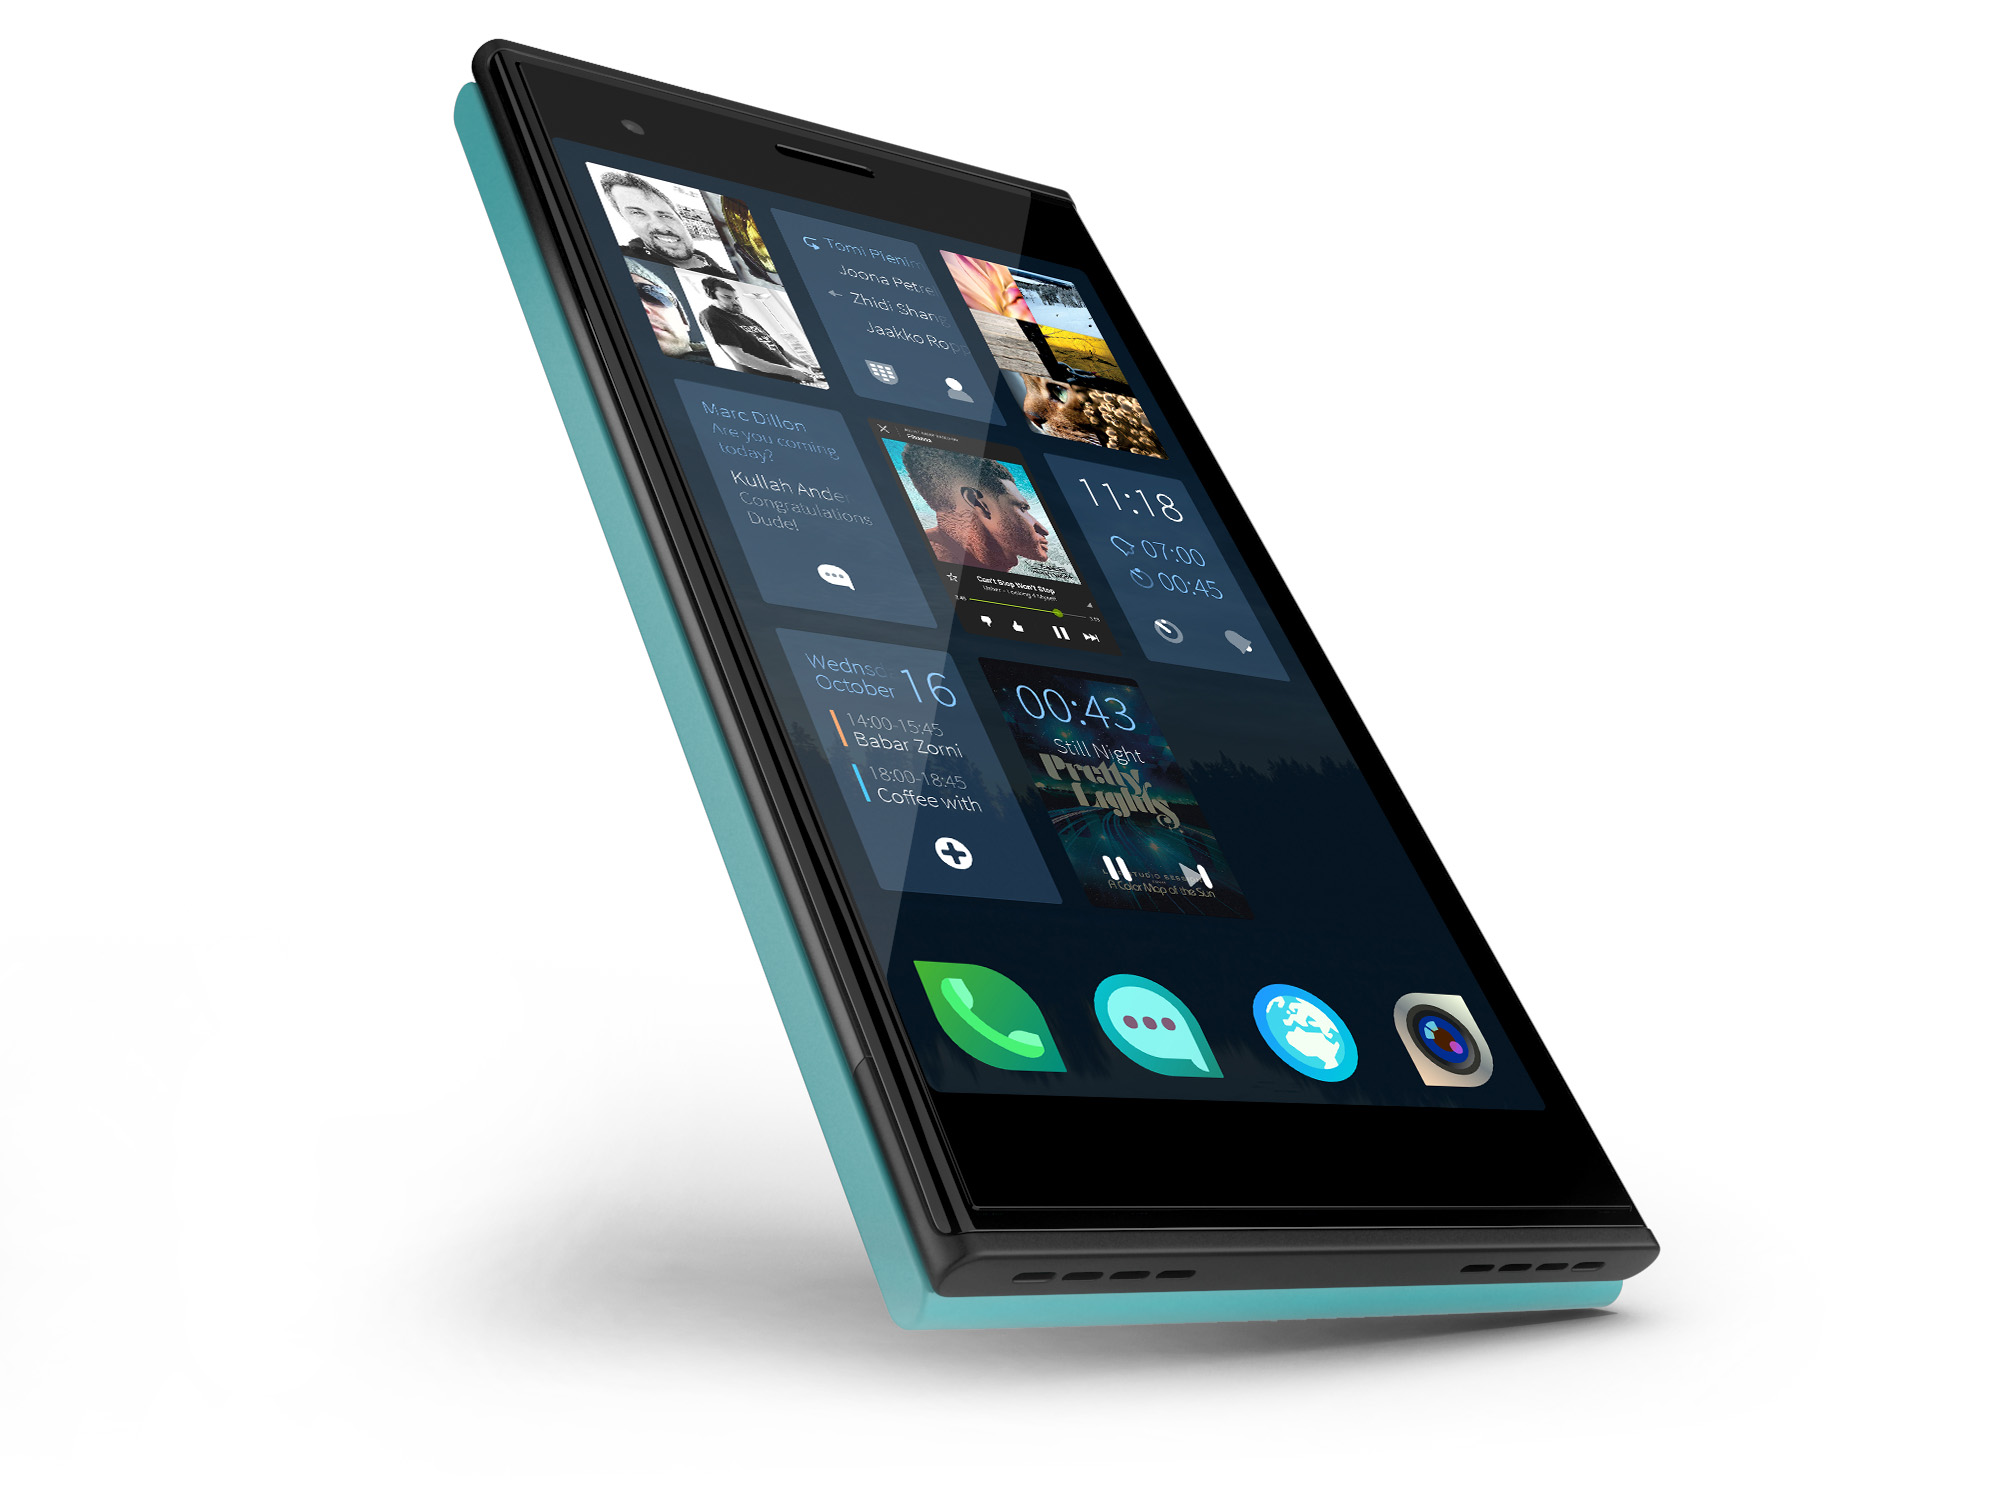 Finnish Telecommunications Provider DNA to Launch First Jolla Phone November 27